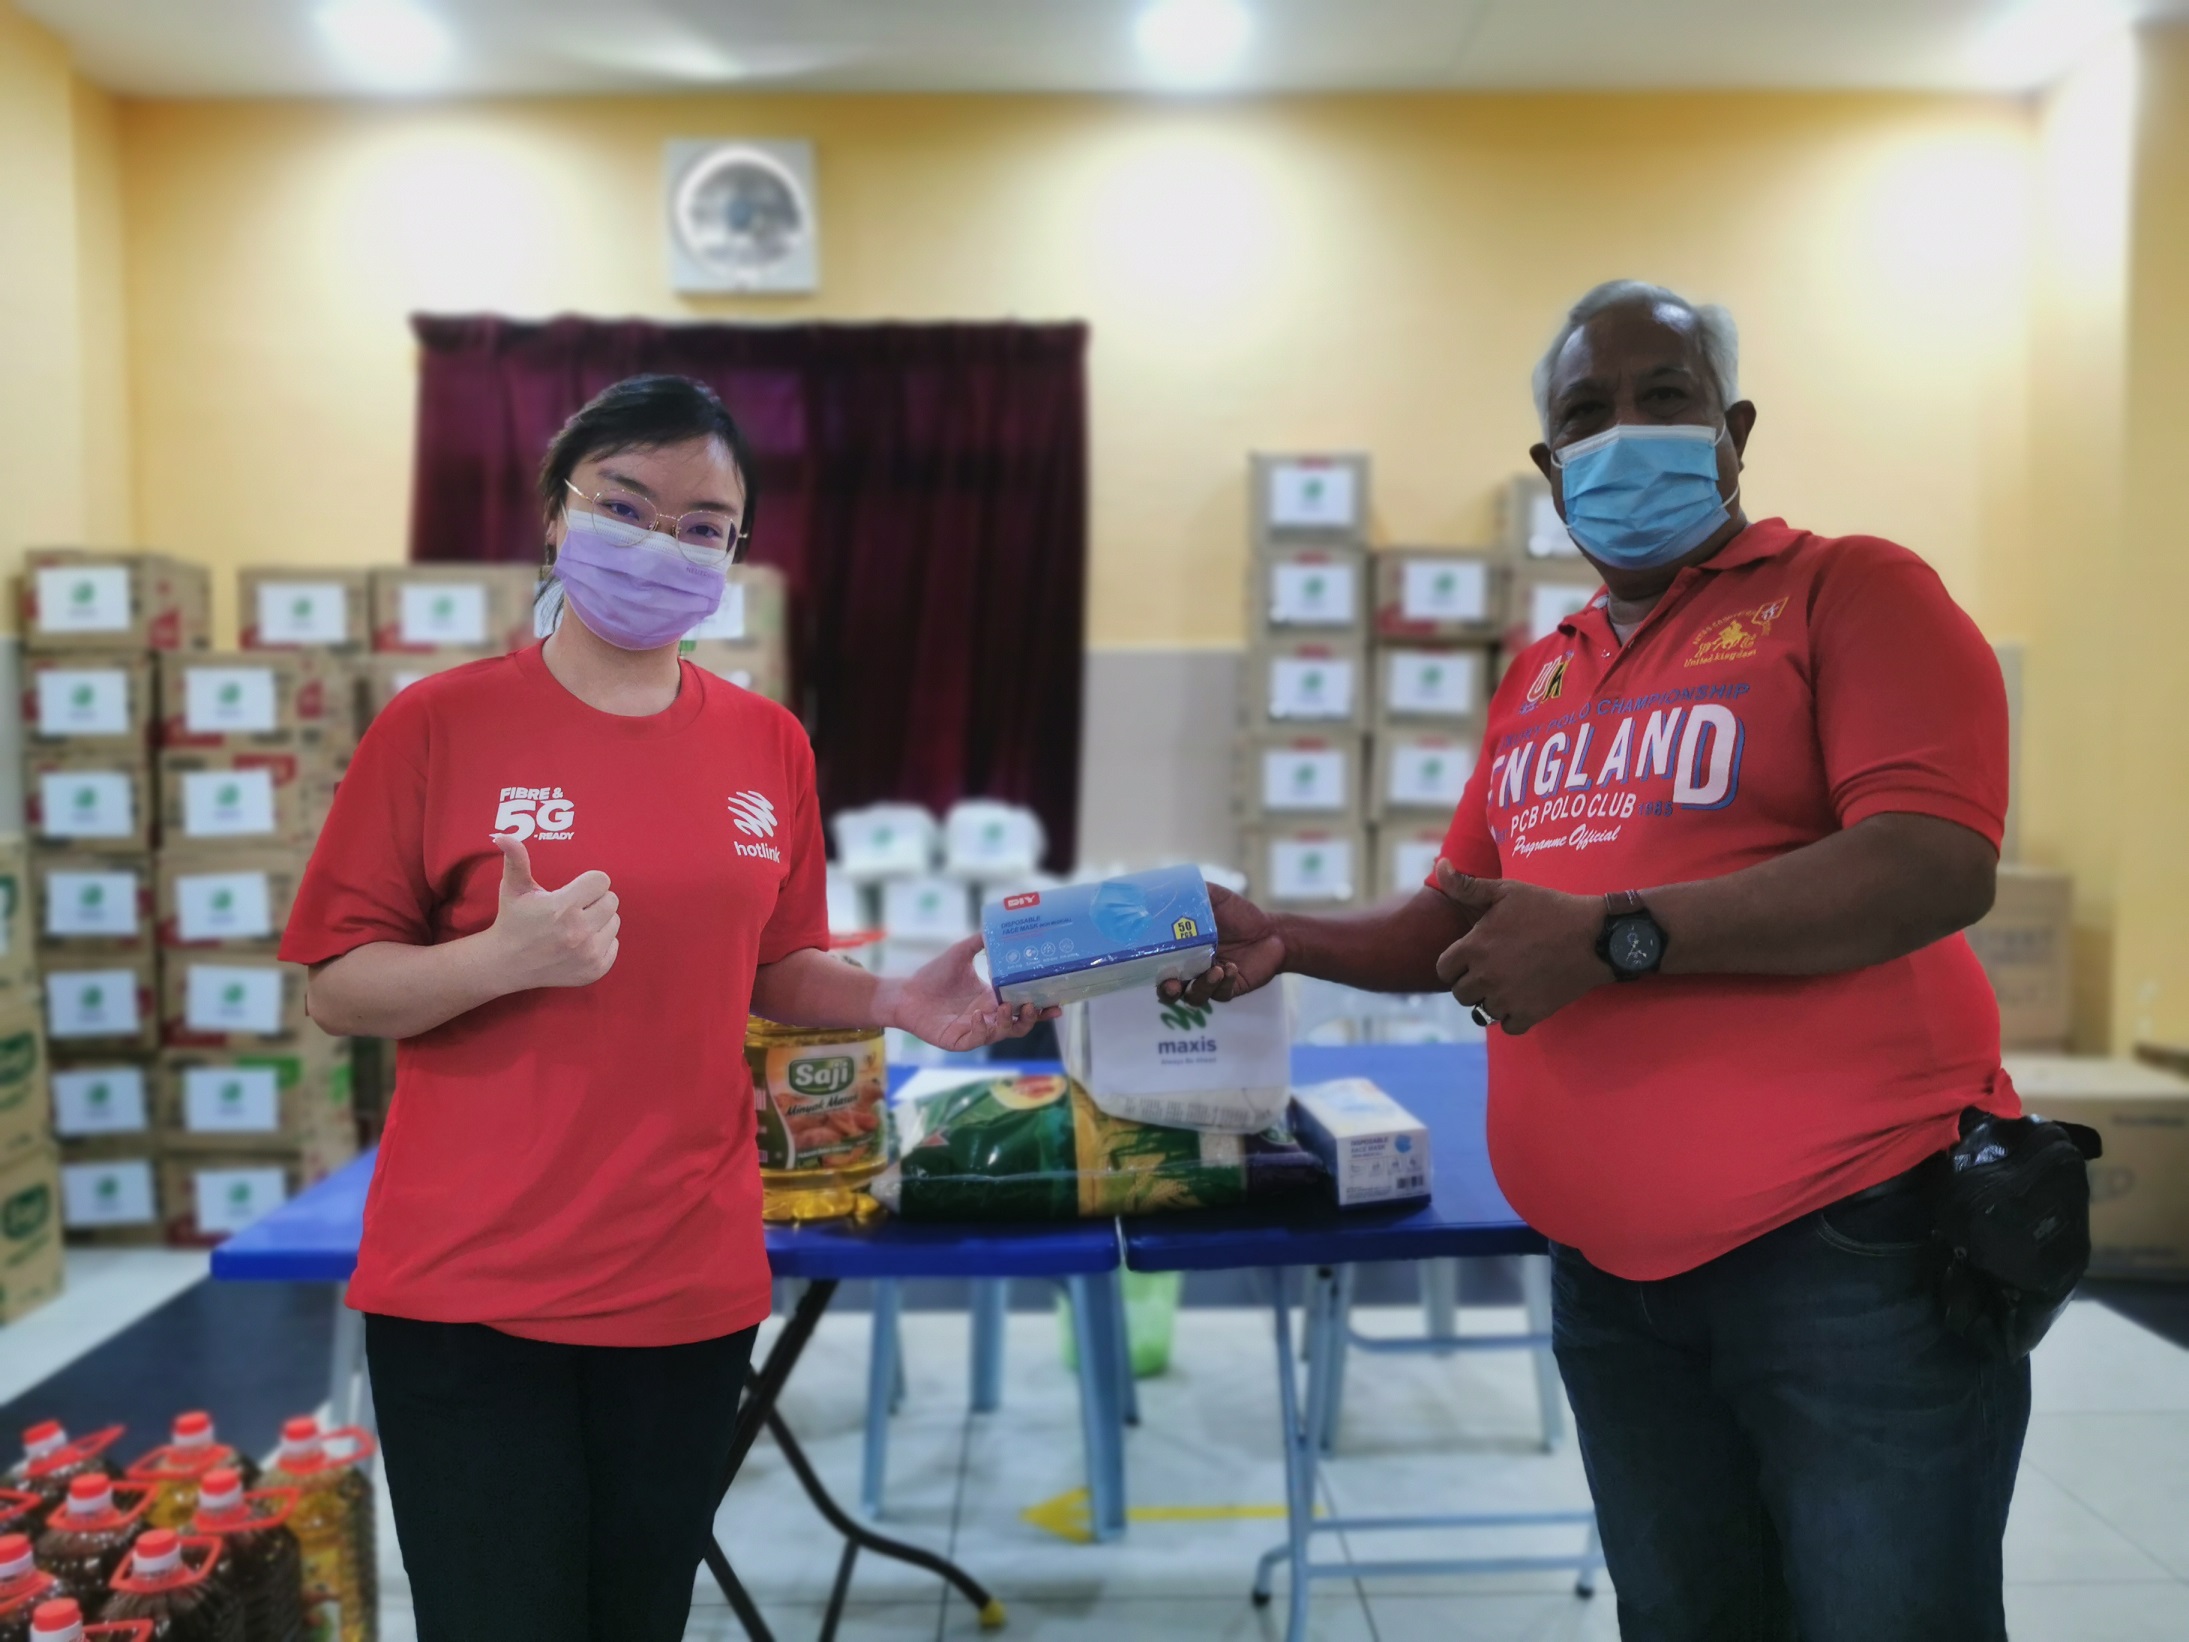 Maxis provides aid to B40 communities in conjunction with recent CNY to help families stay safe 